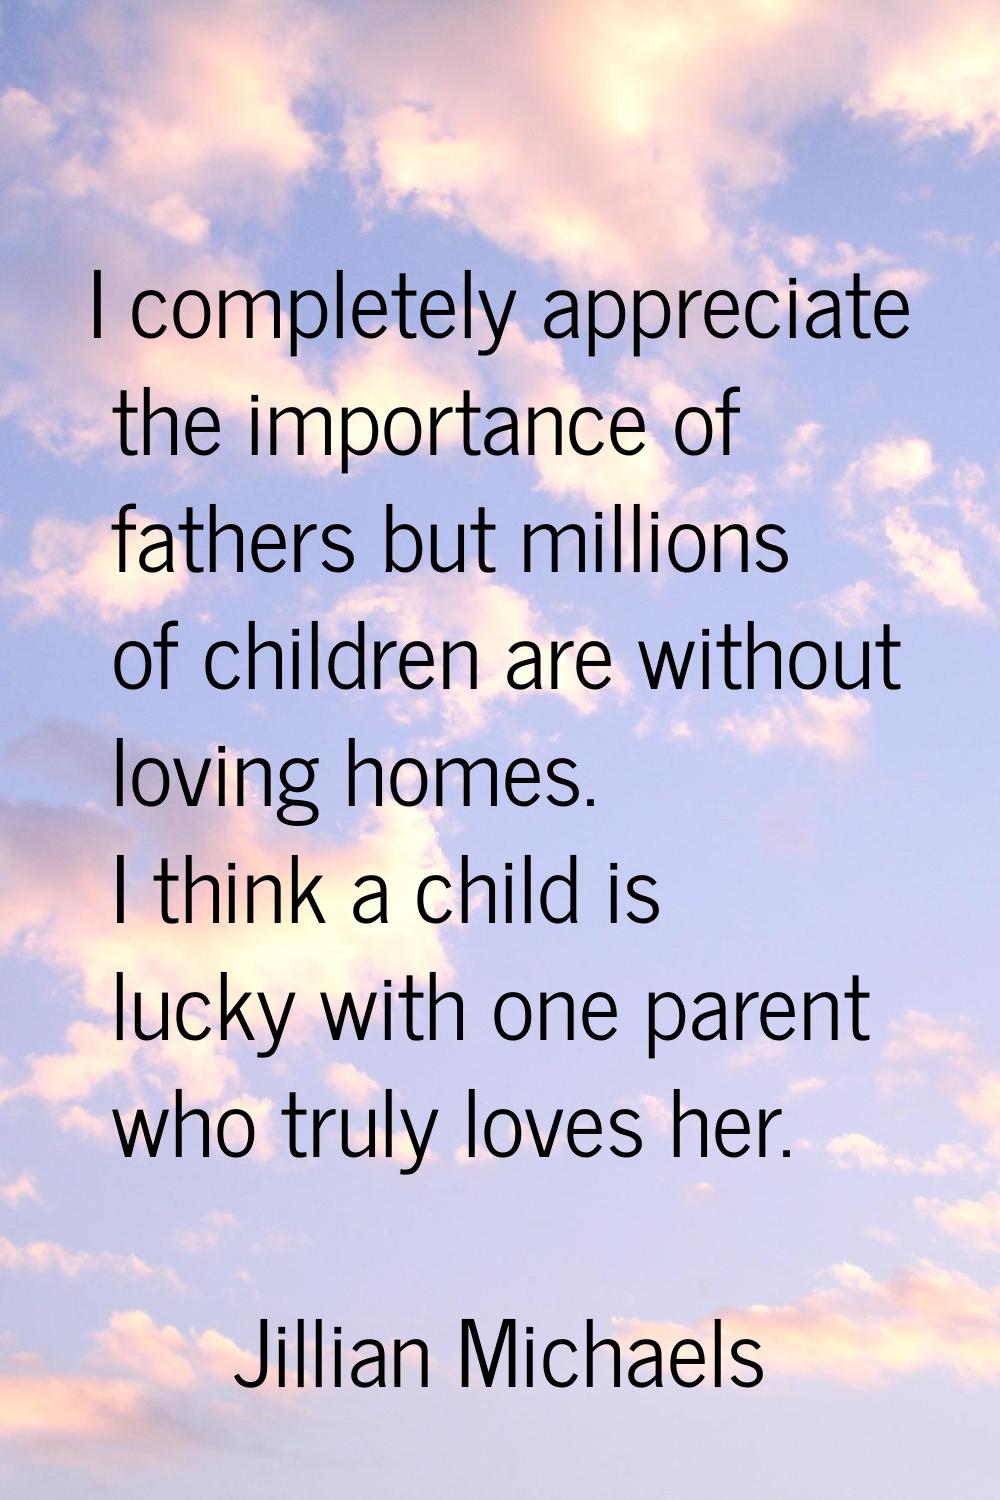 I completely appreciate the importance of fathers but millions of children are without loving homes